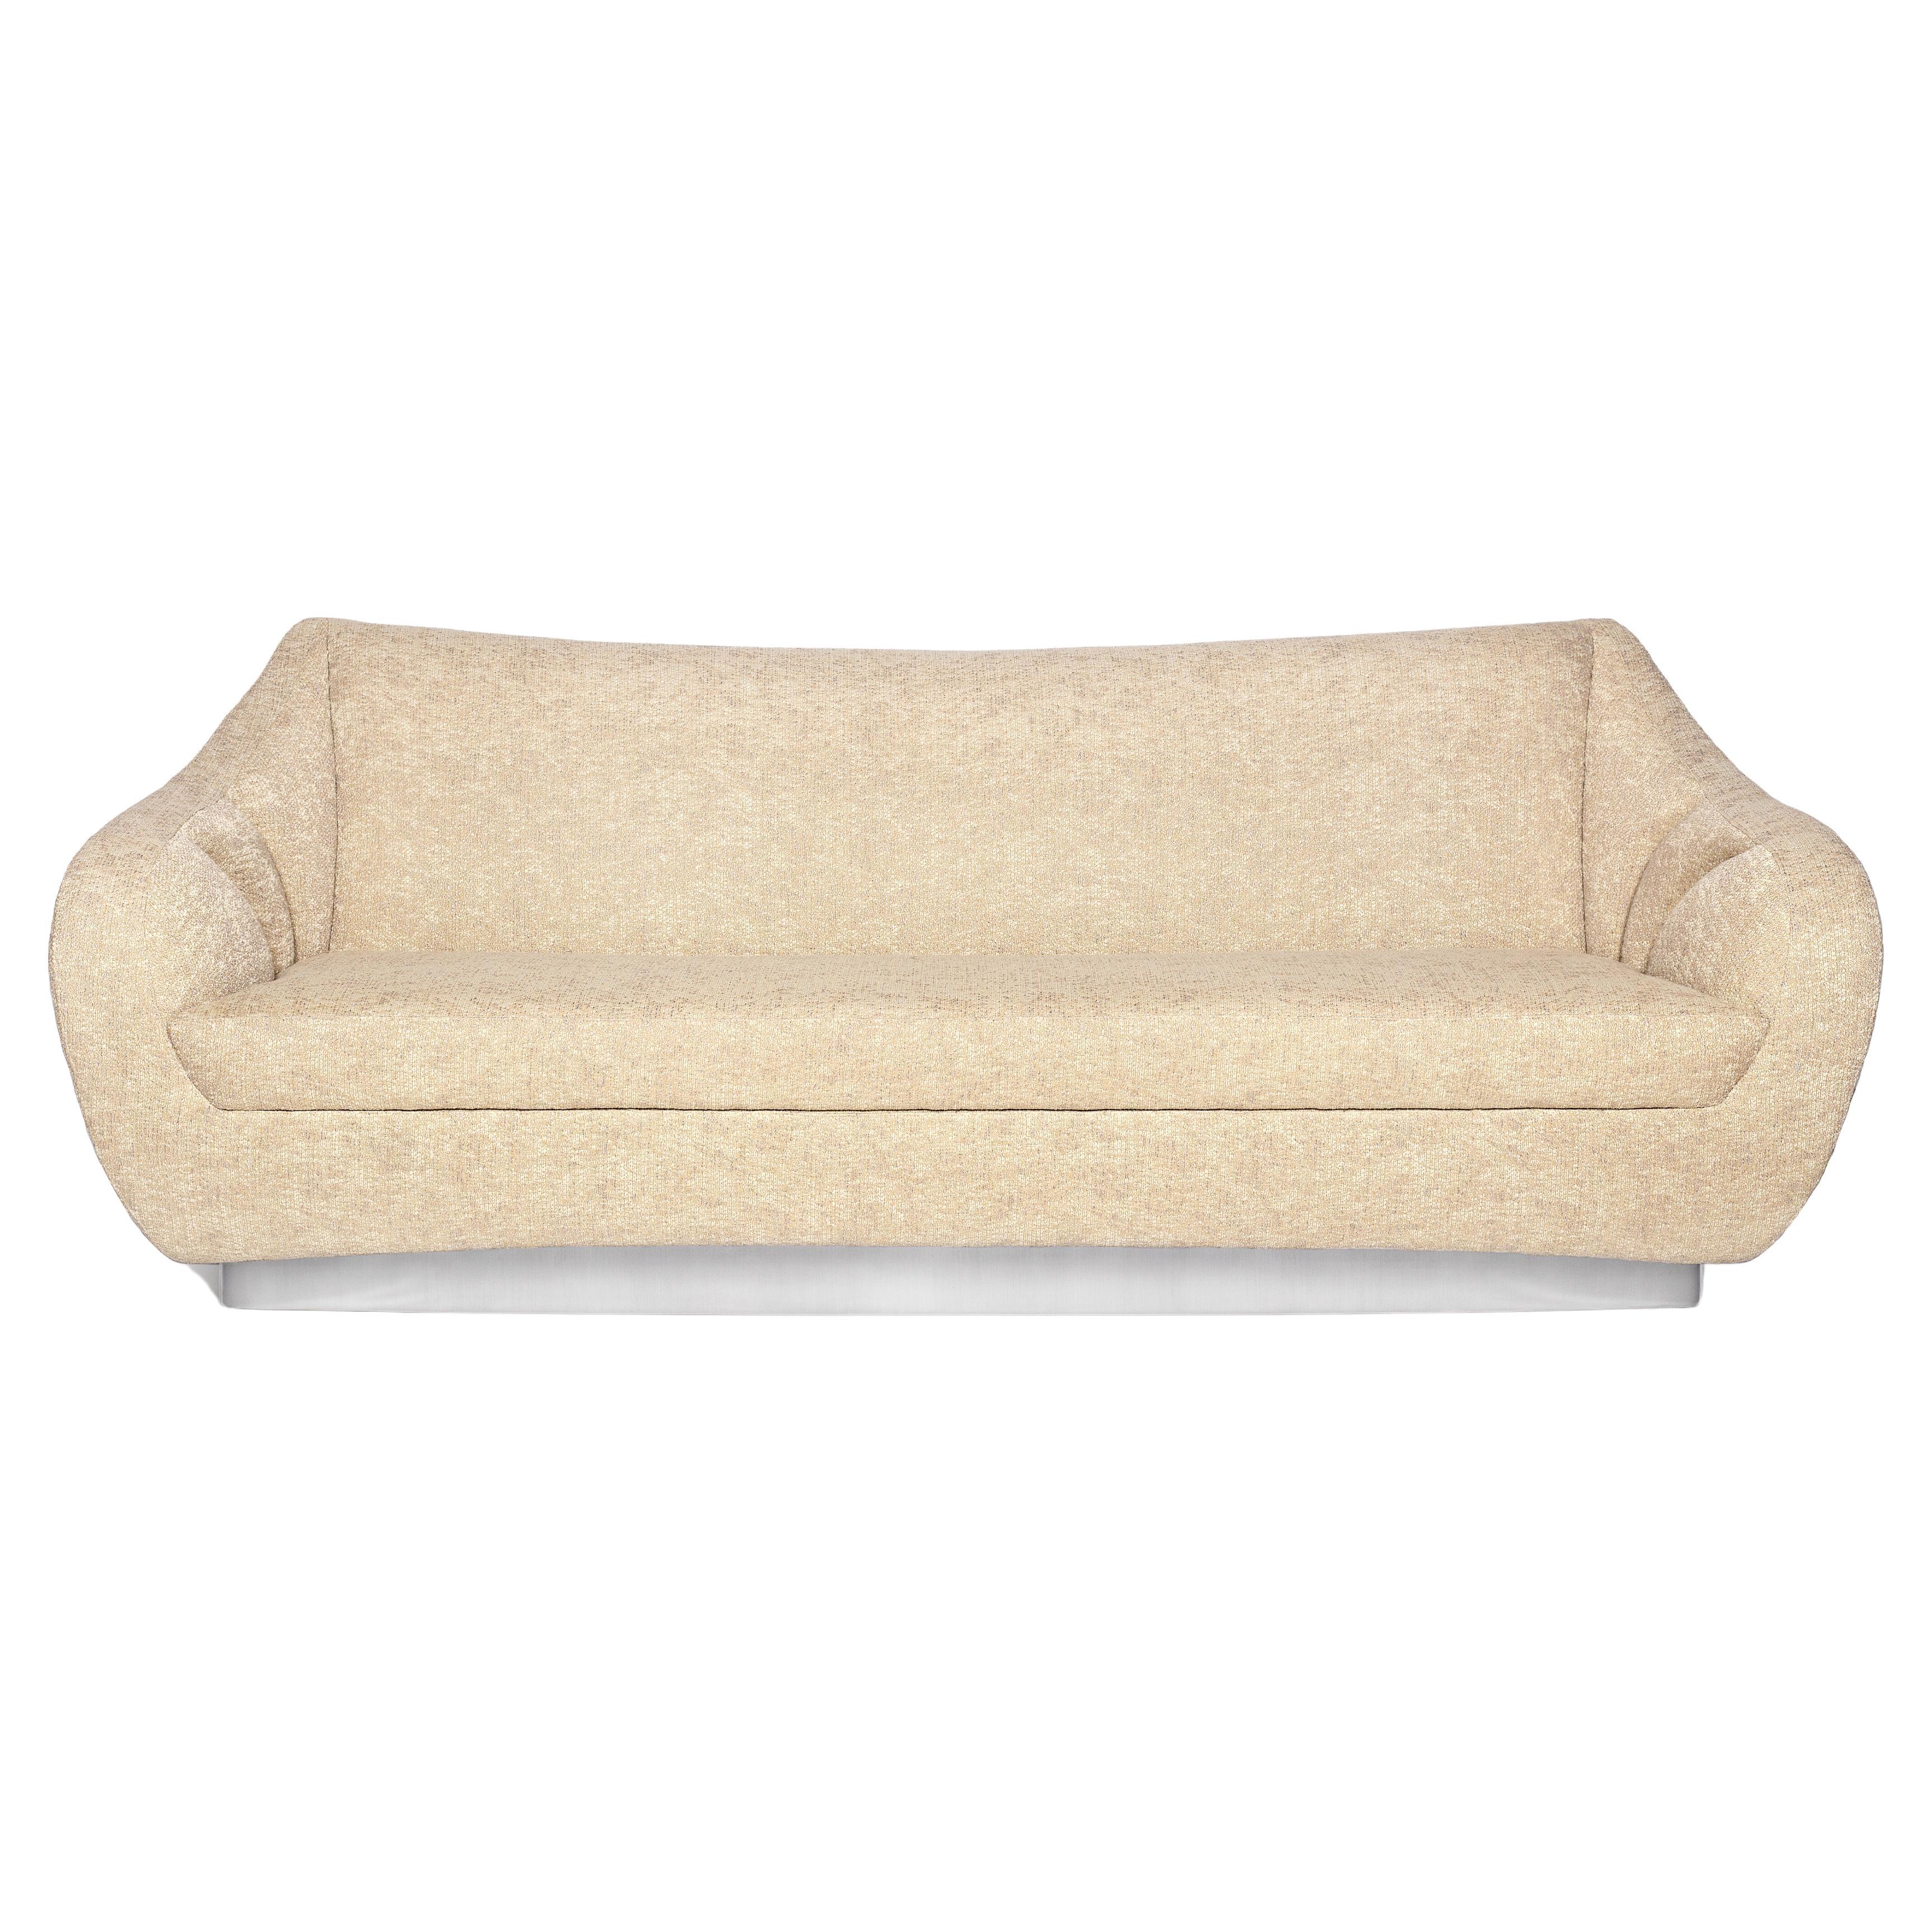 Figueroa 3 Seat Sofa by InsidherLand For Sale